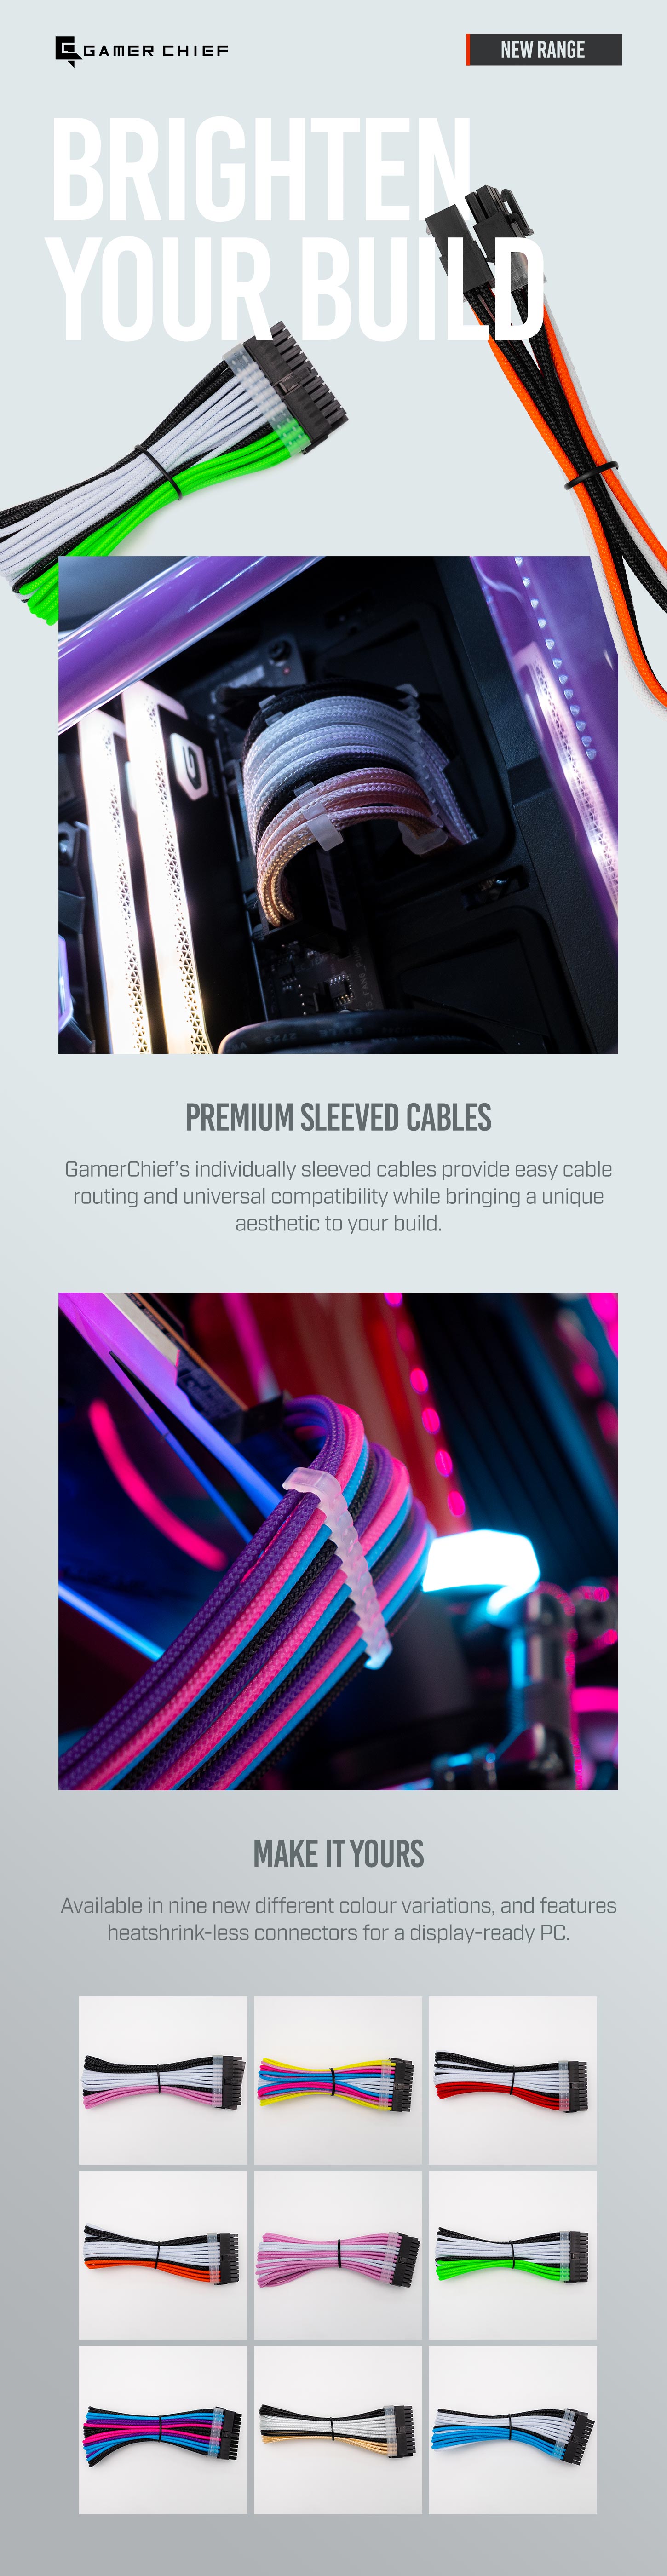 A large marketing image providing additional information about the product GamerChief Elite Series 6-Pin PCIe 30cm Sleeved Extension Cable (Blue / Pink / Purple / Black) - Additional alt info not provided